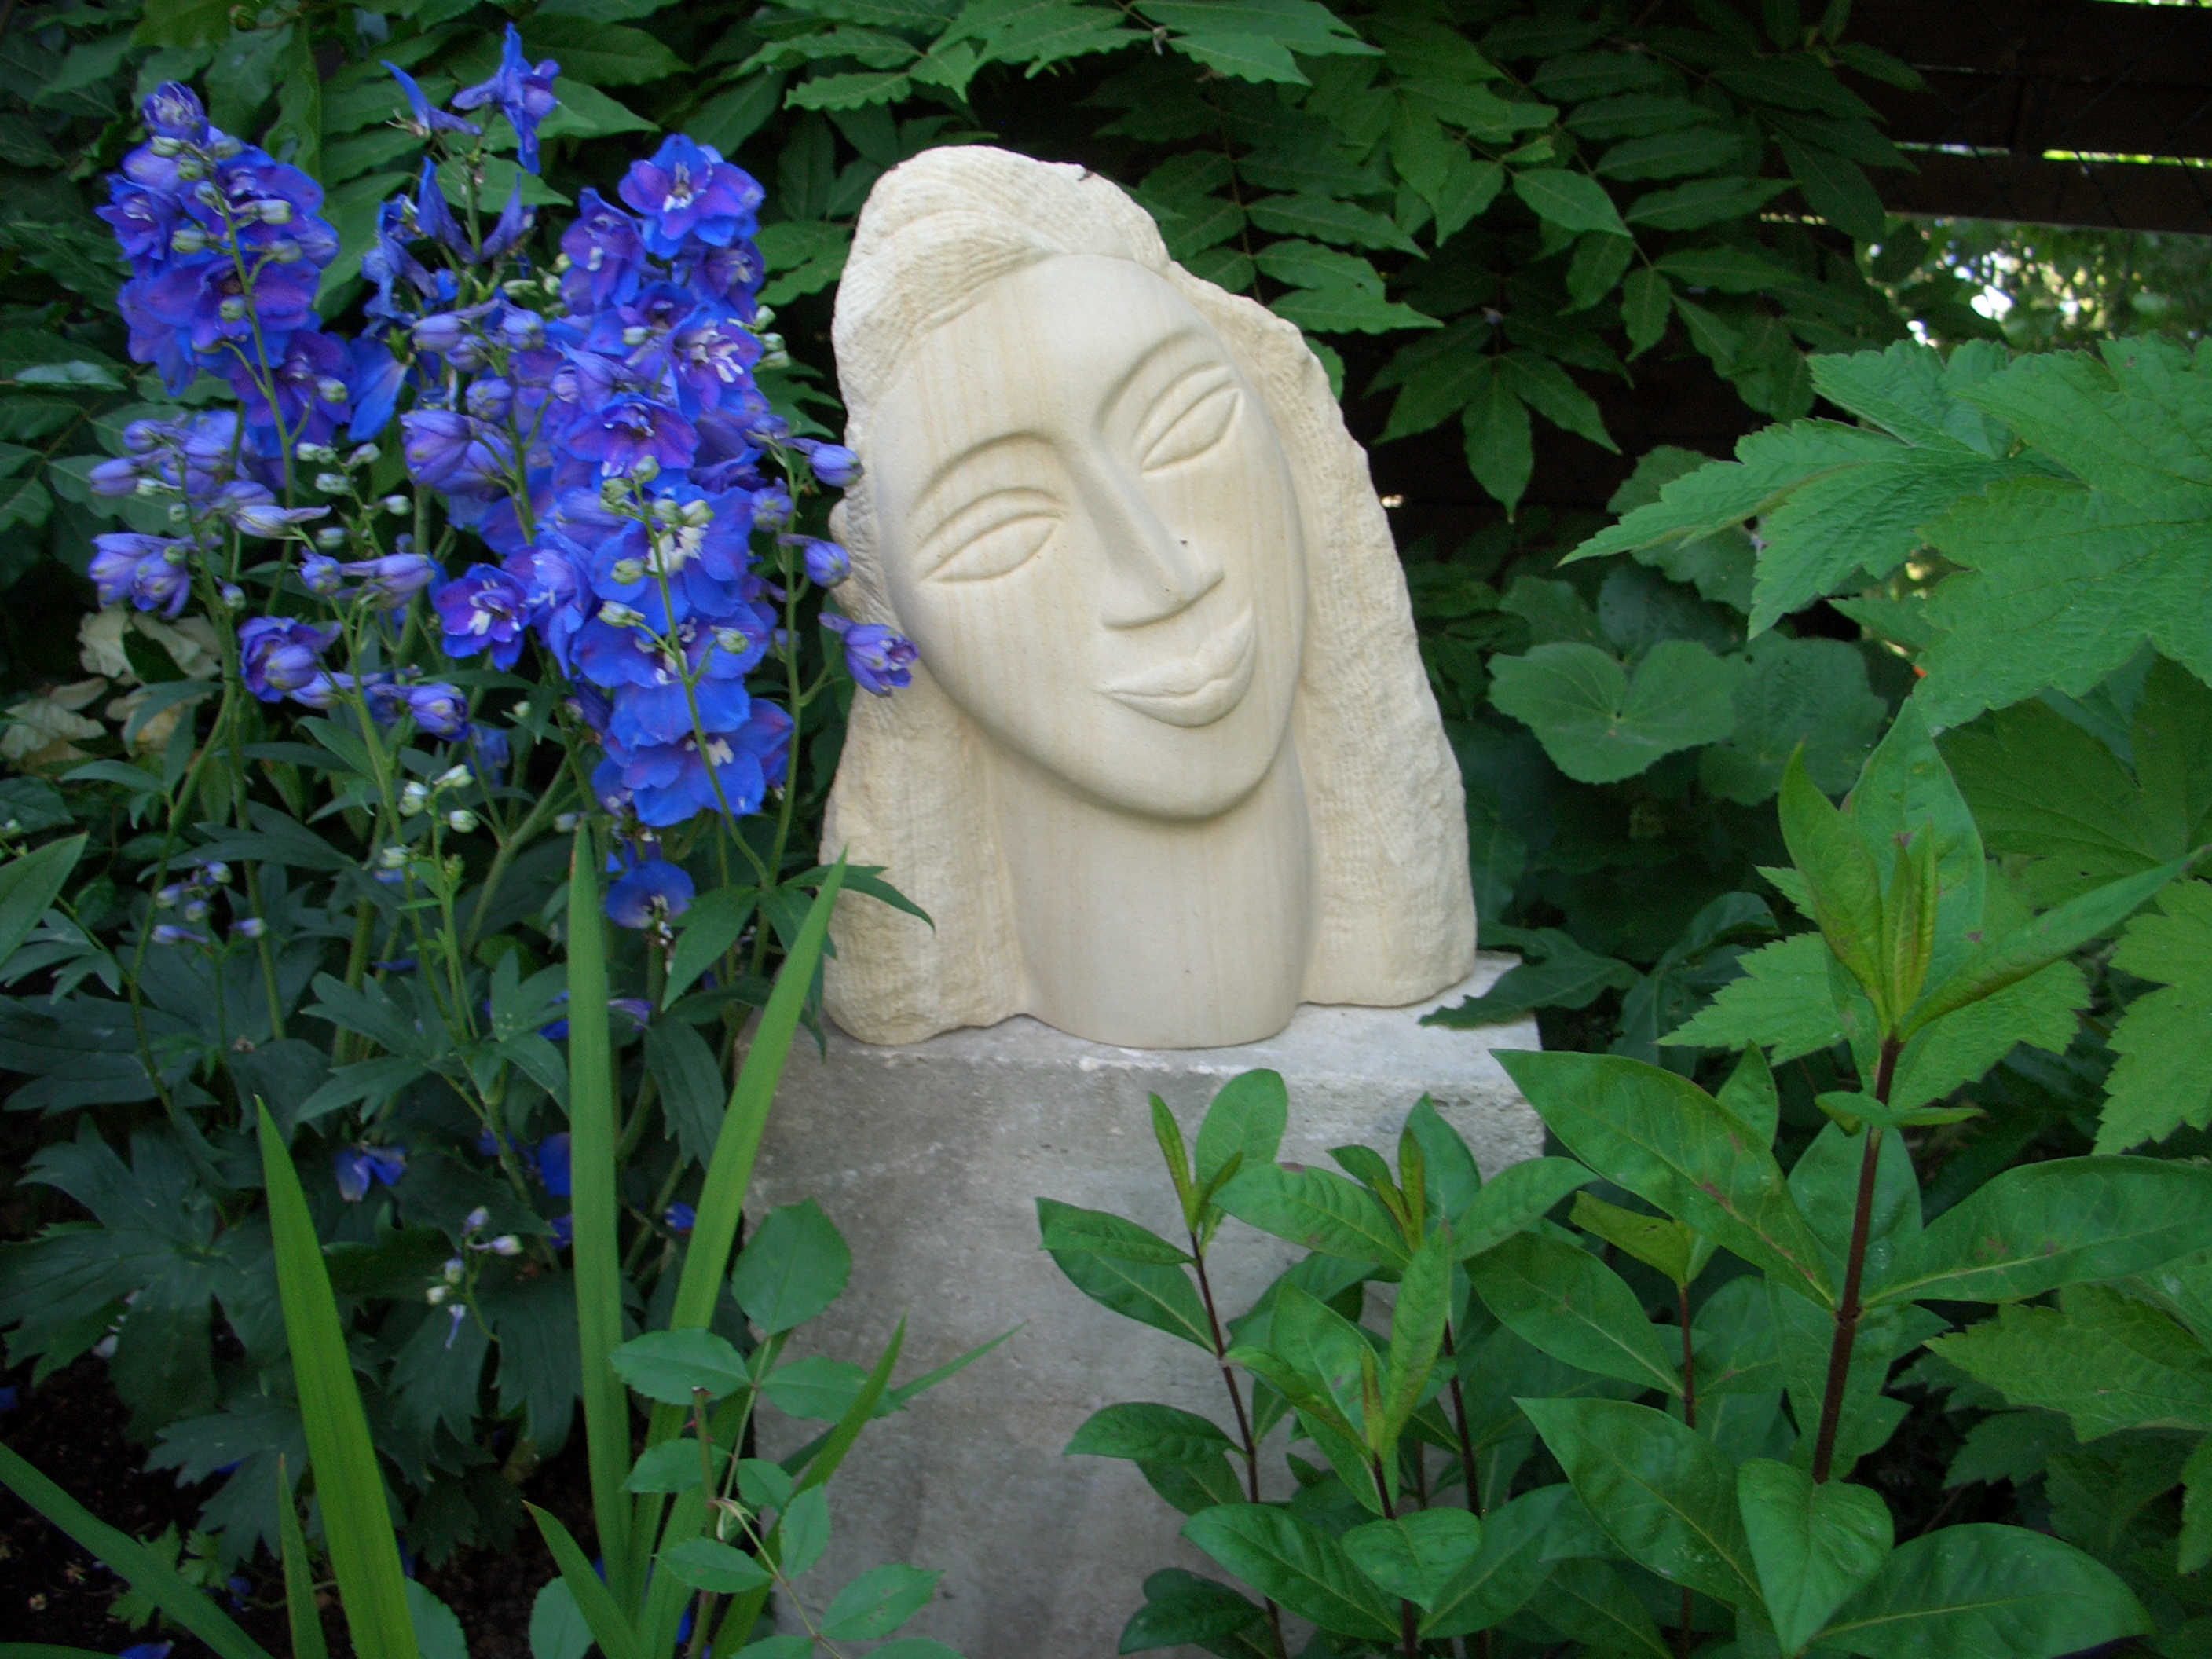 Aloha, a sculpture made of sandstone by Gabriele Cantari